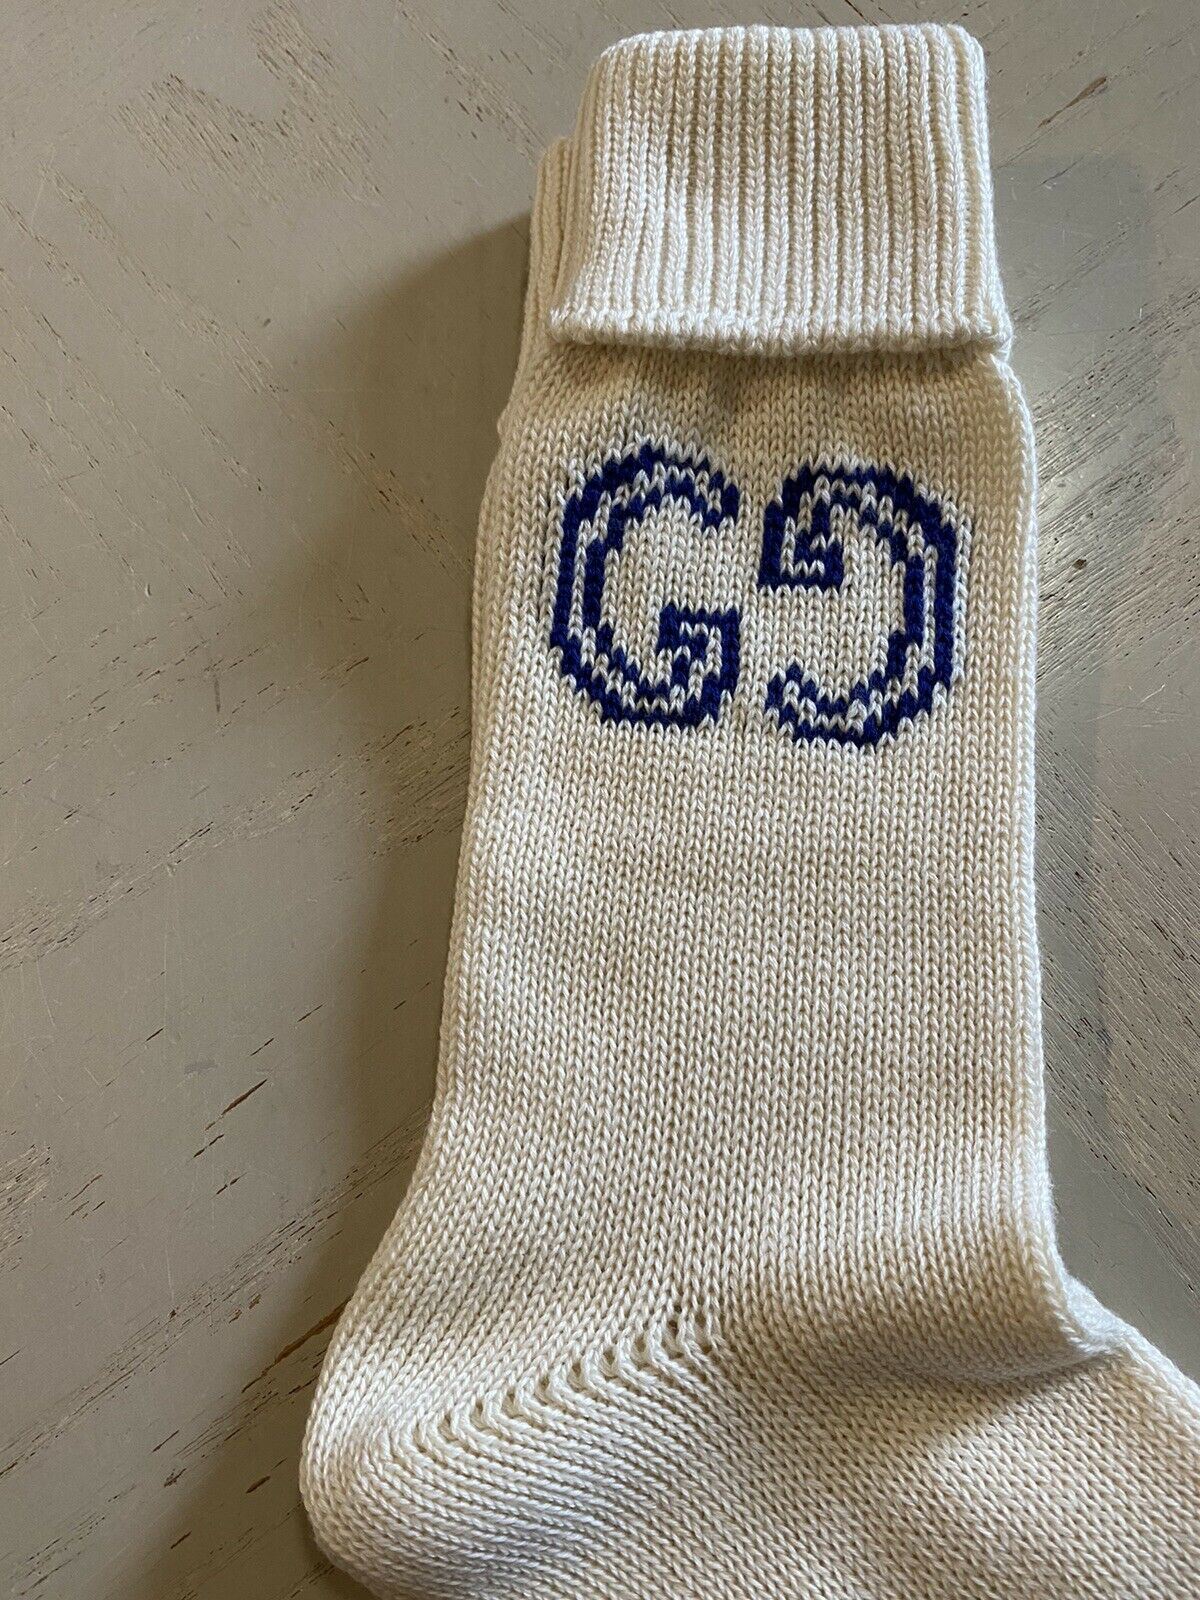 NWT Gucci Men’s Cotton Socks With GG Monogram Ivory Size M Italy